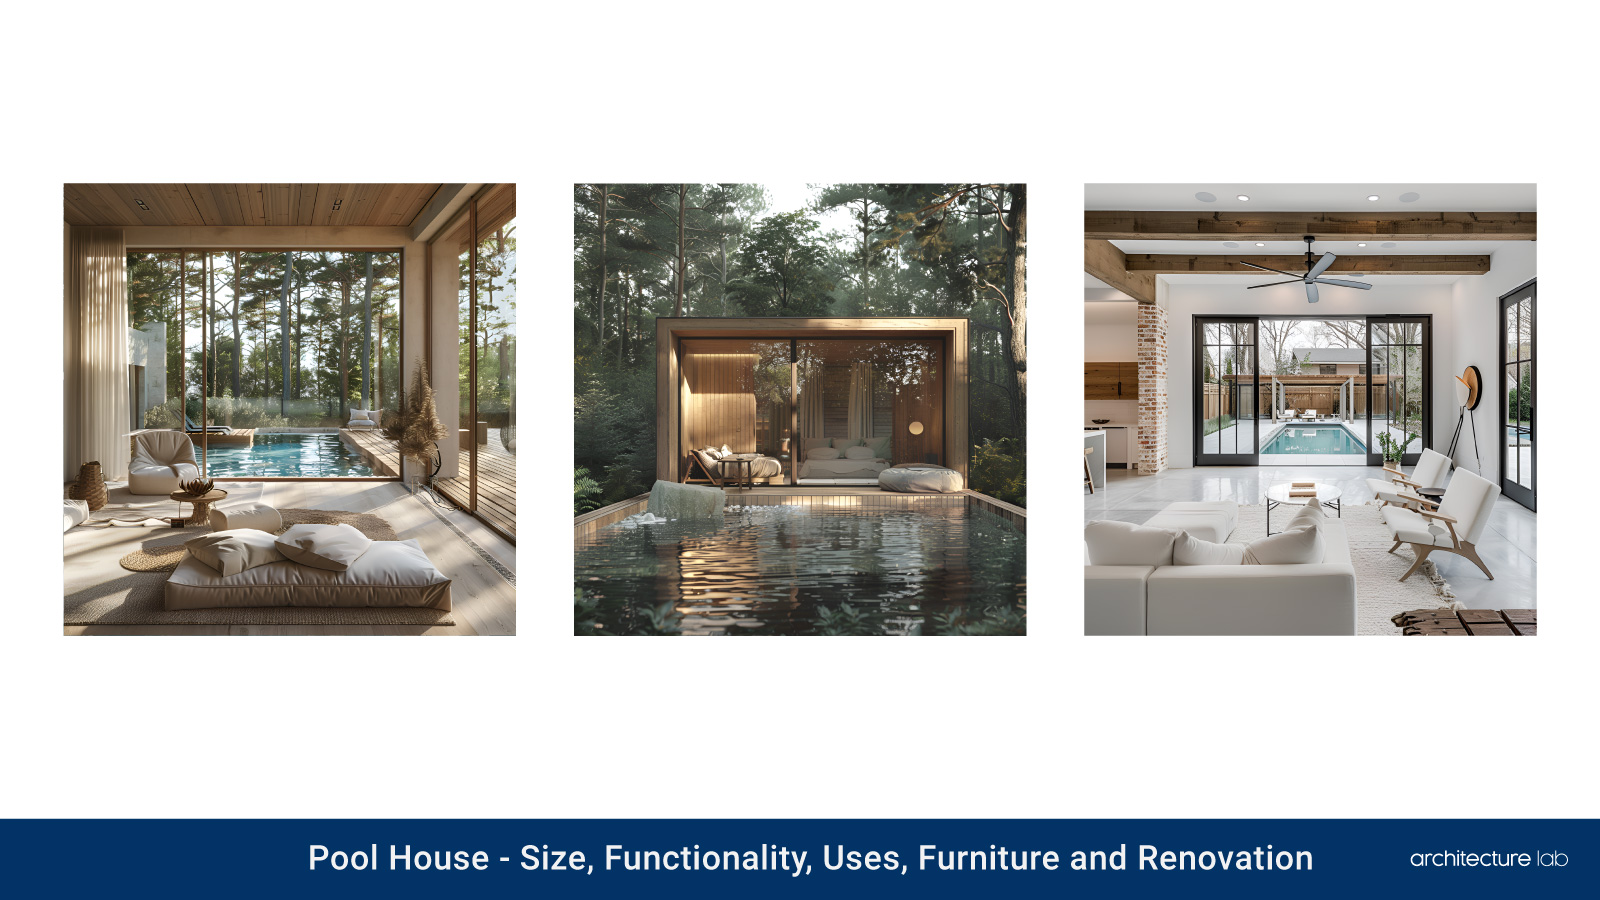 Pool house: size, functionality, uses, furniture and renovation